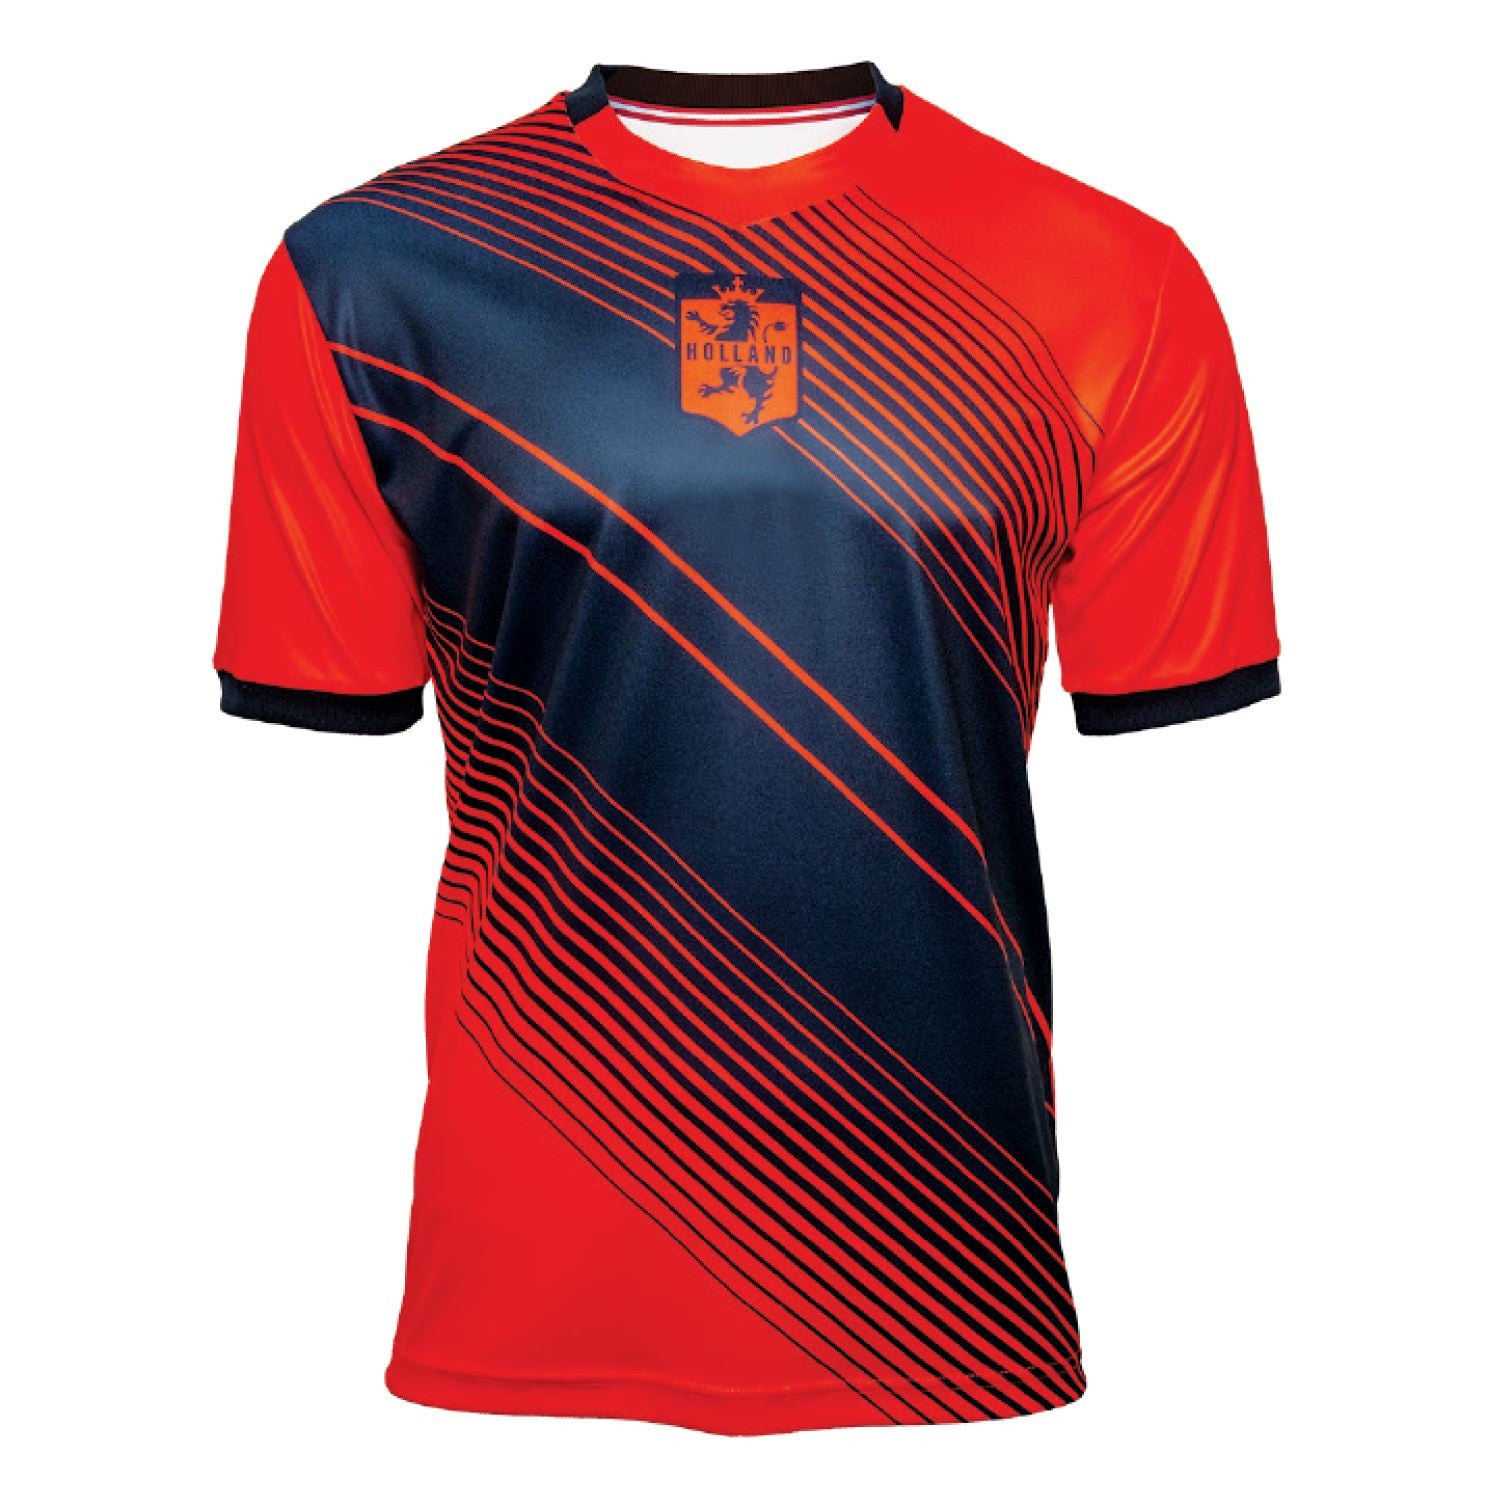 Holland Jersey - International Series Theme Series Xara Soccer Holland Youth Extra Small 